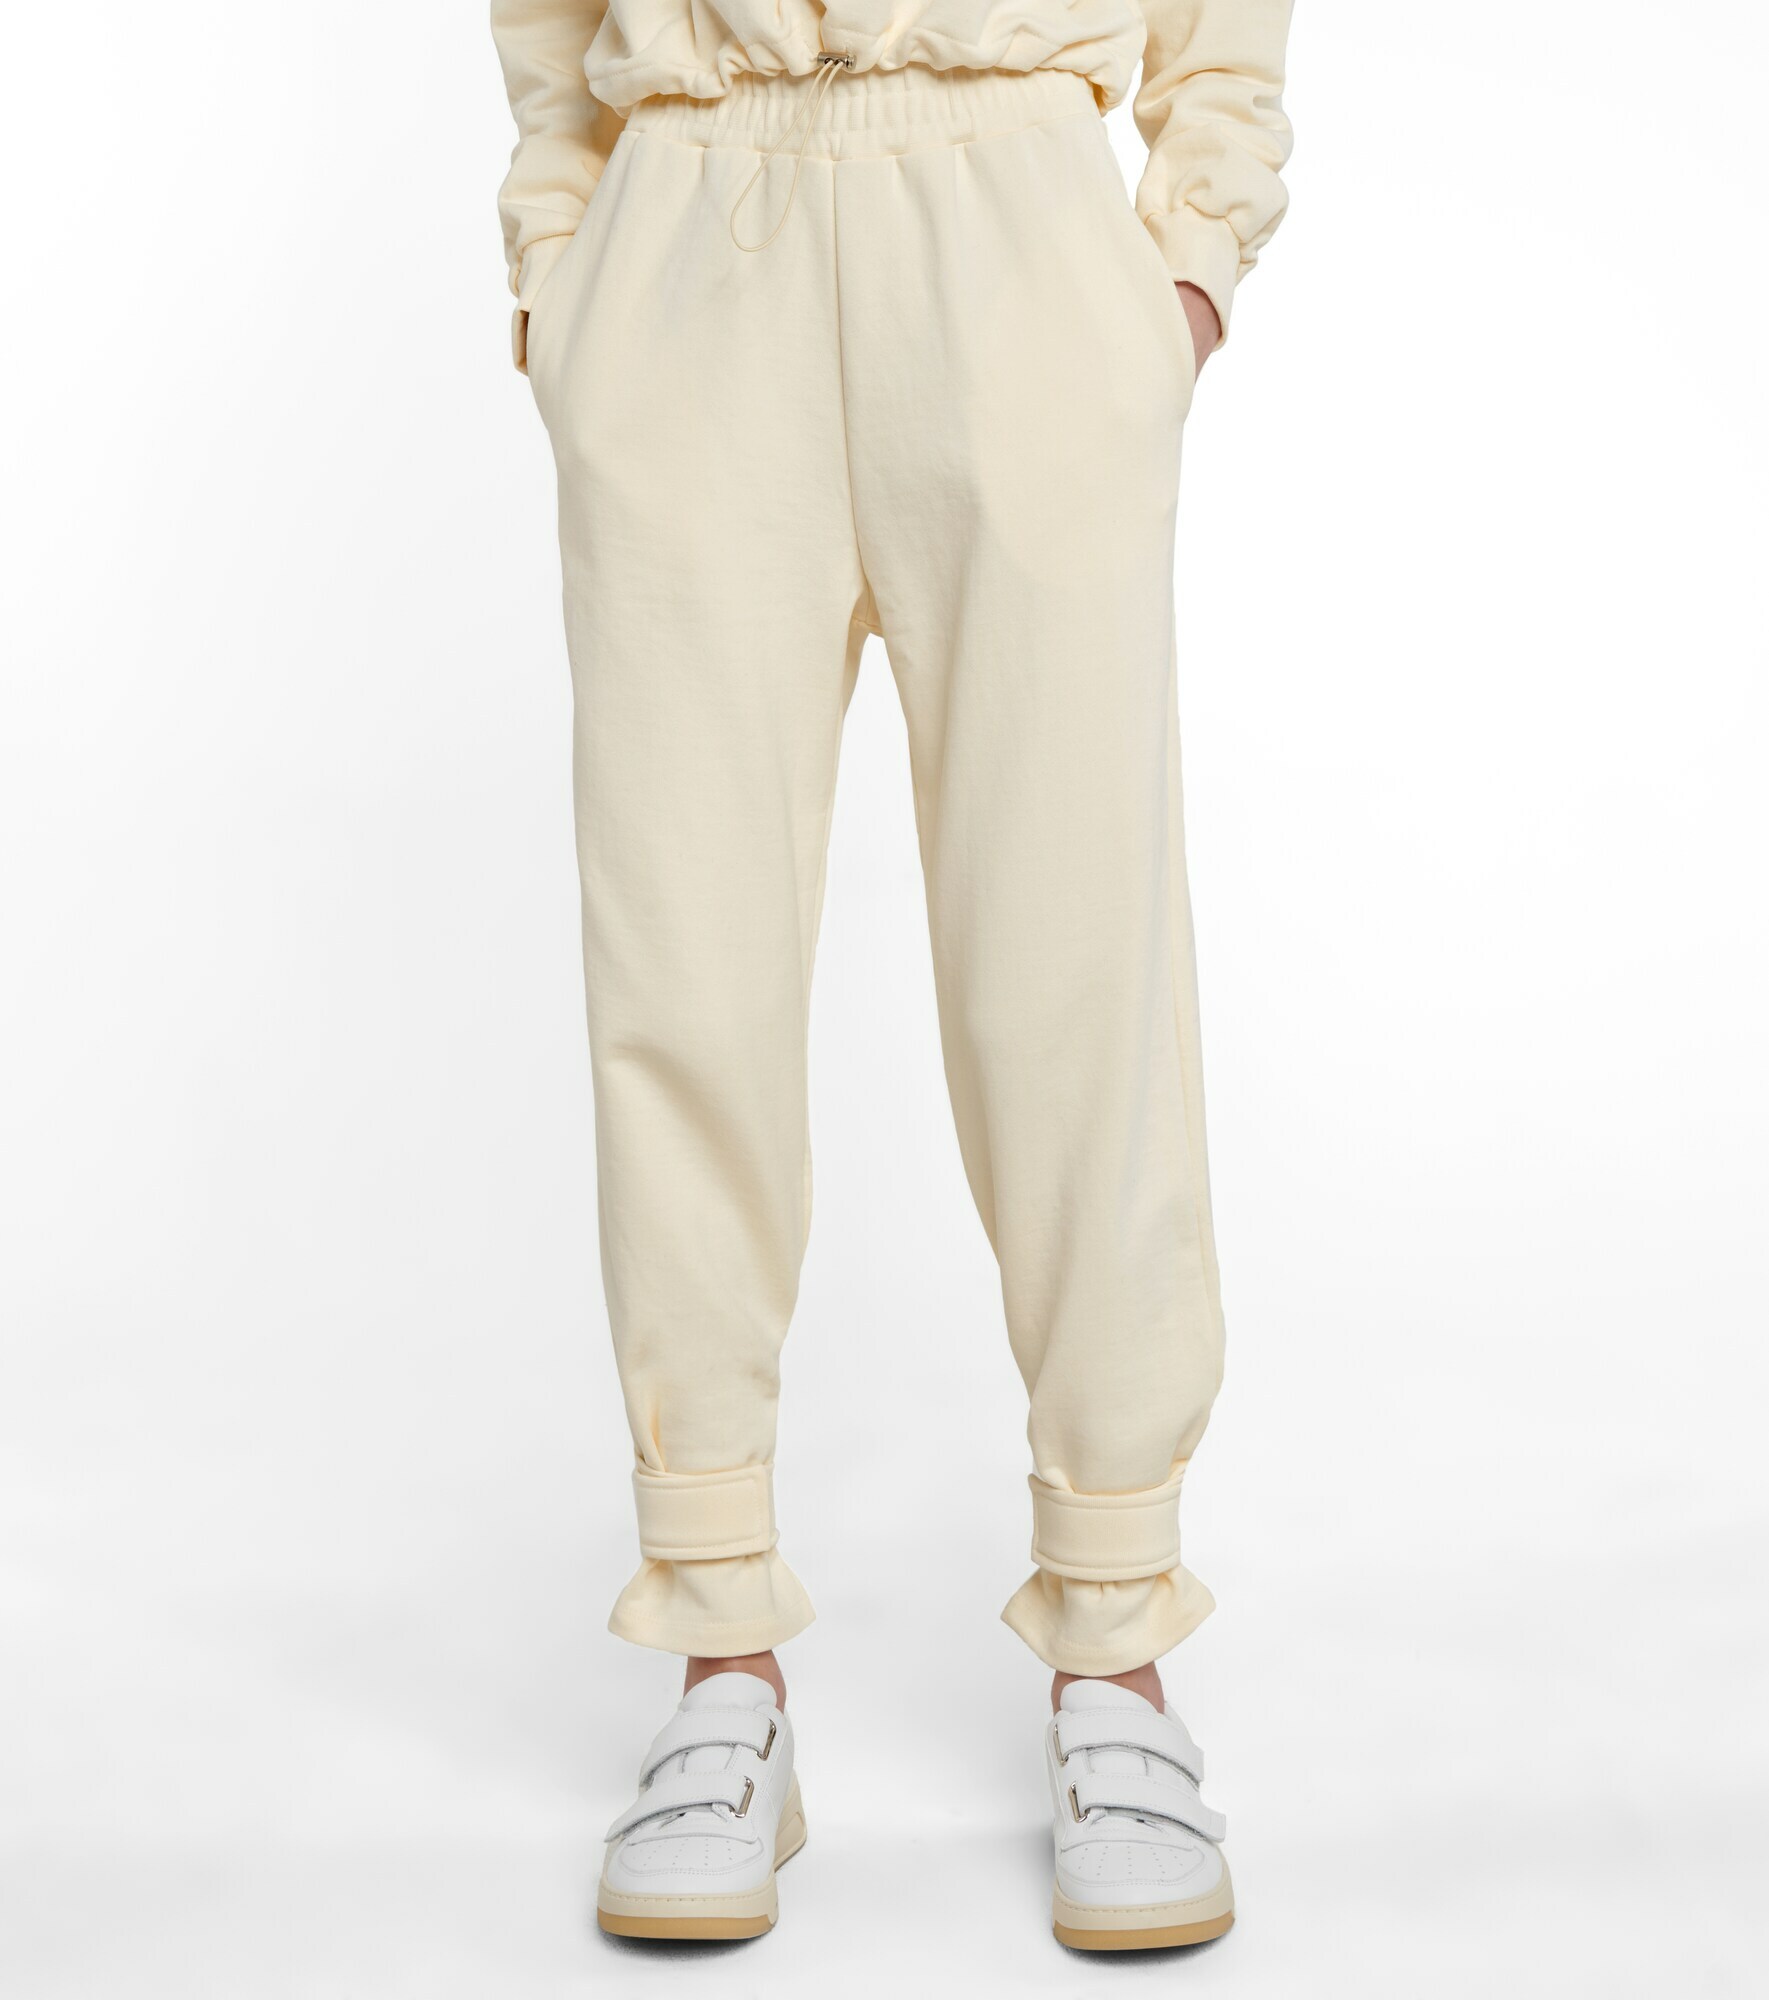 The Frankie Shop - Cuffed cotton terry sweatpants The Frankie Shop